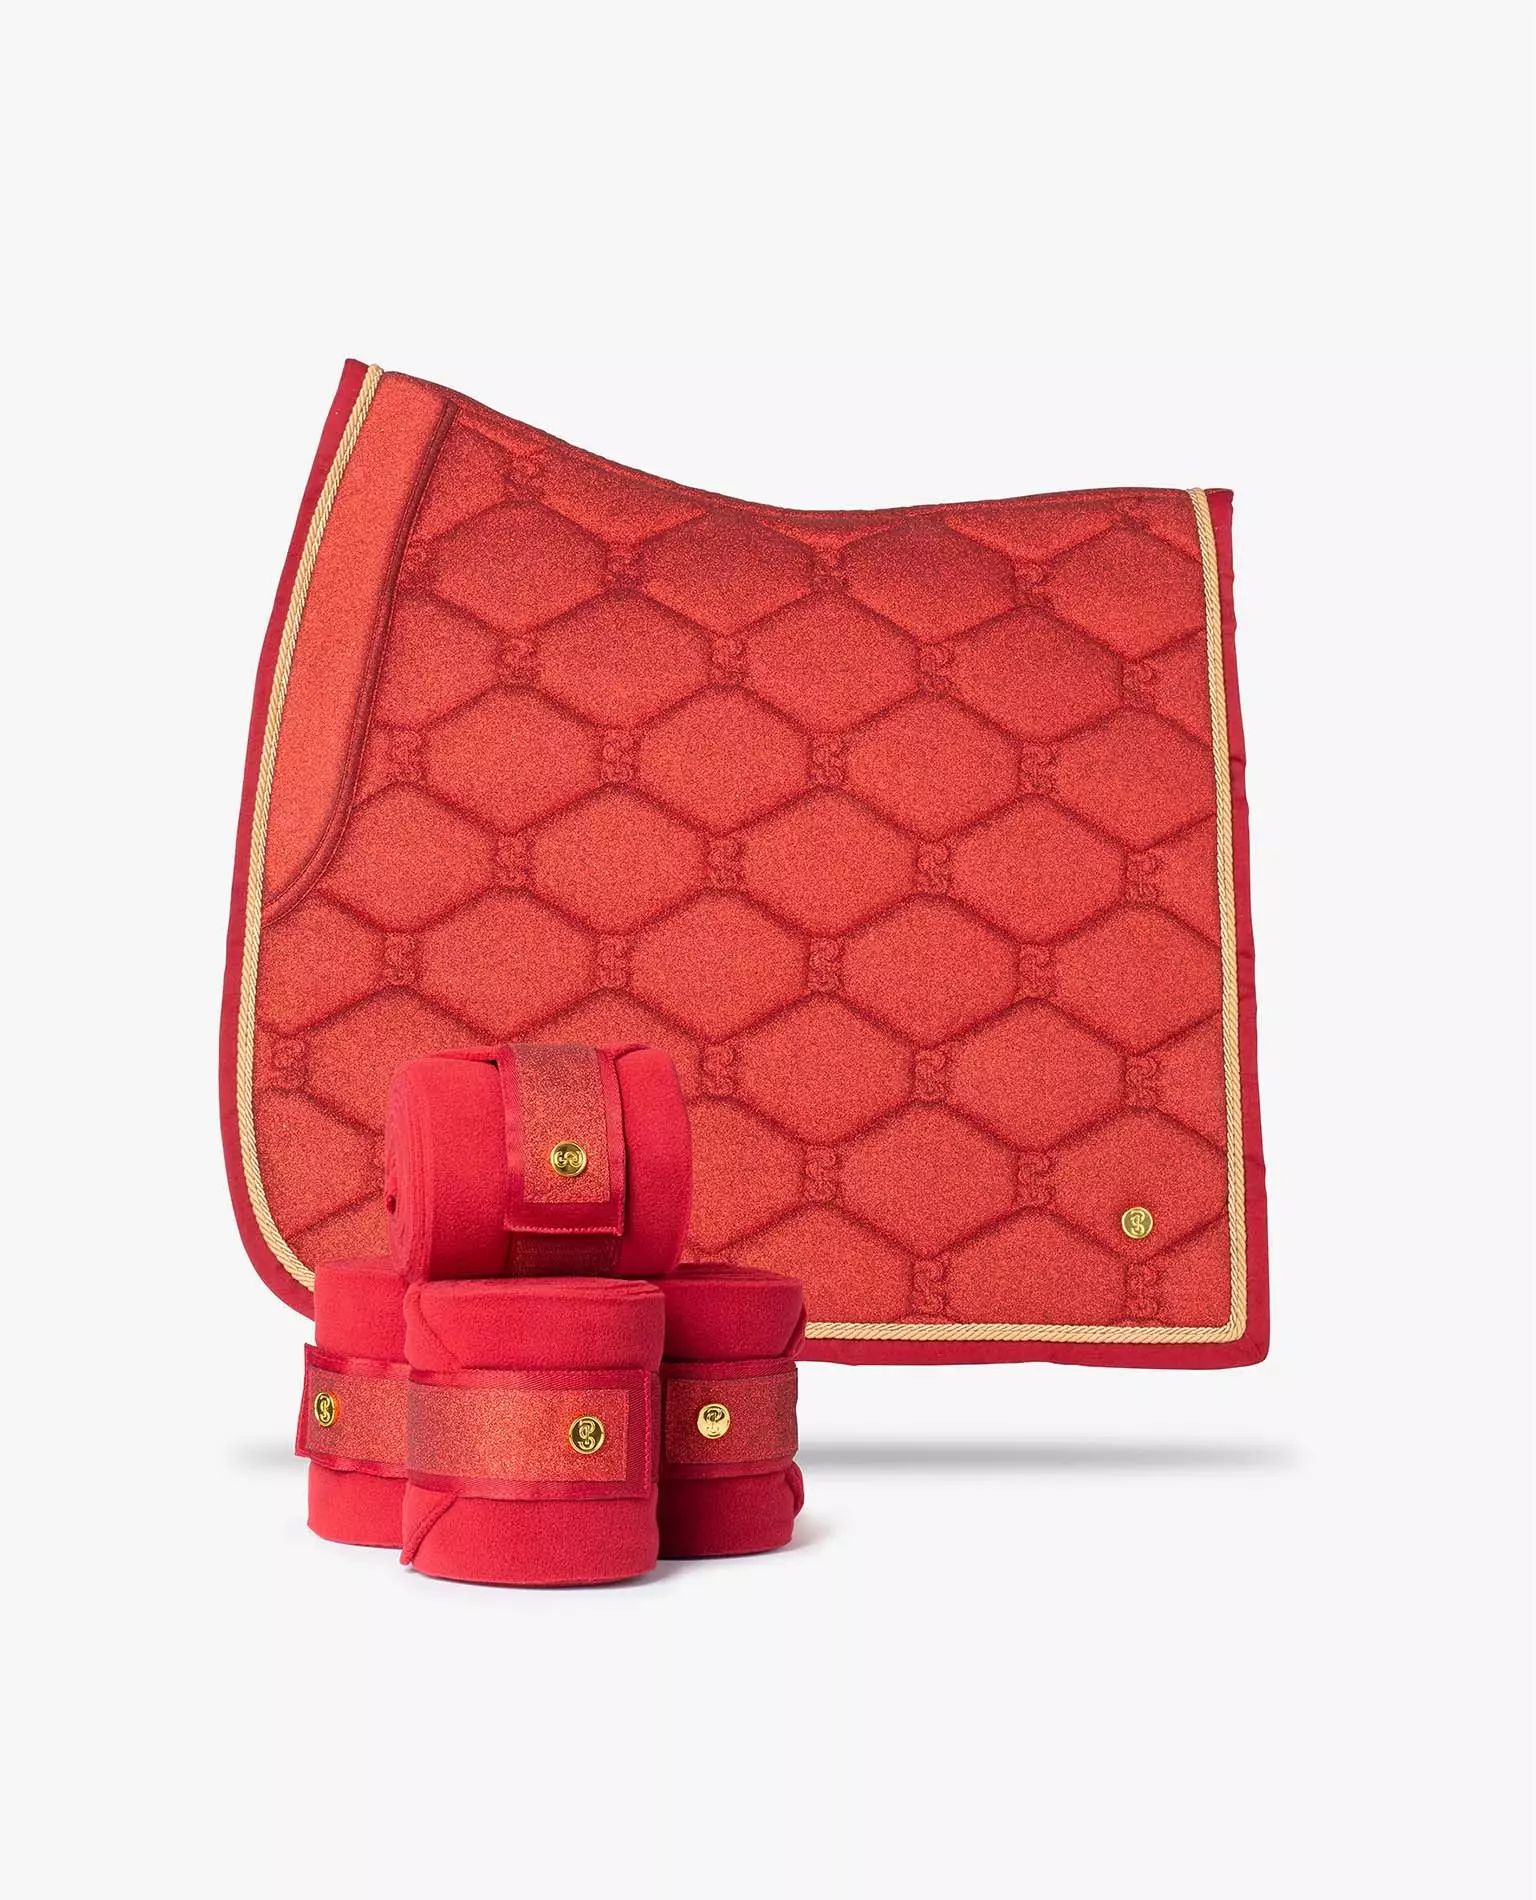 Stardust Dressage (Red/Gold) - 1110-071-376-003 - Saddle Pads